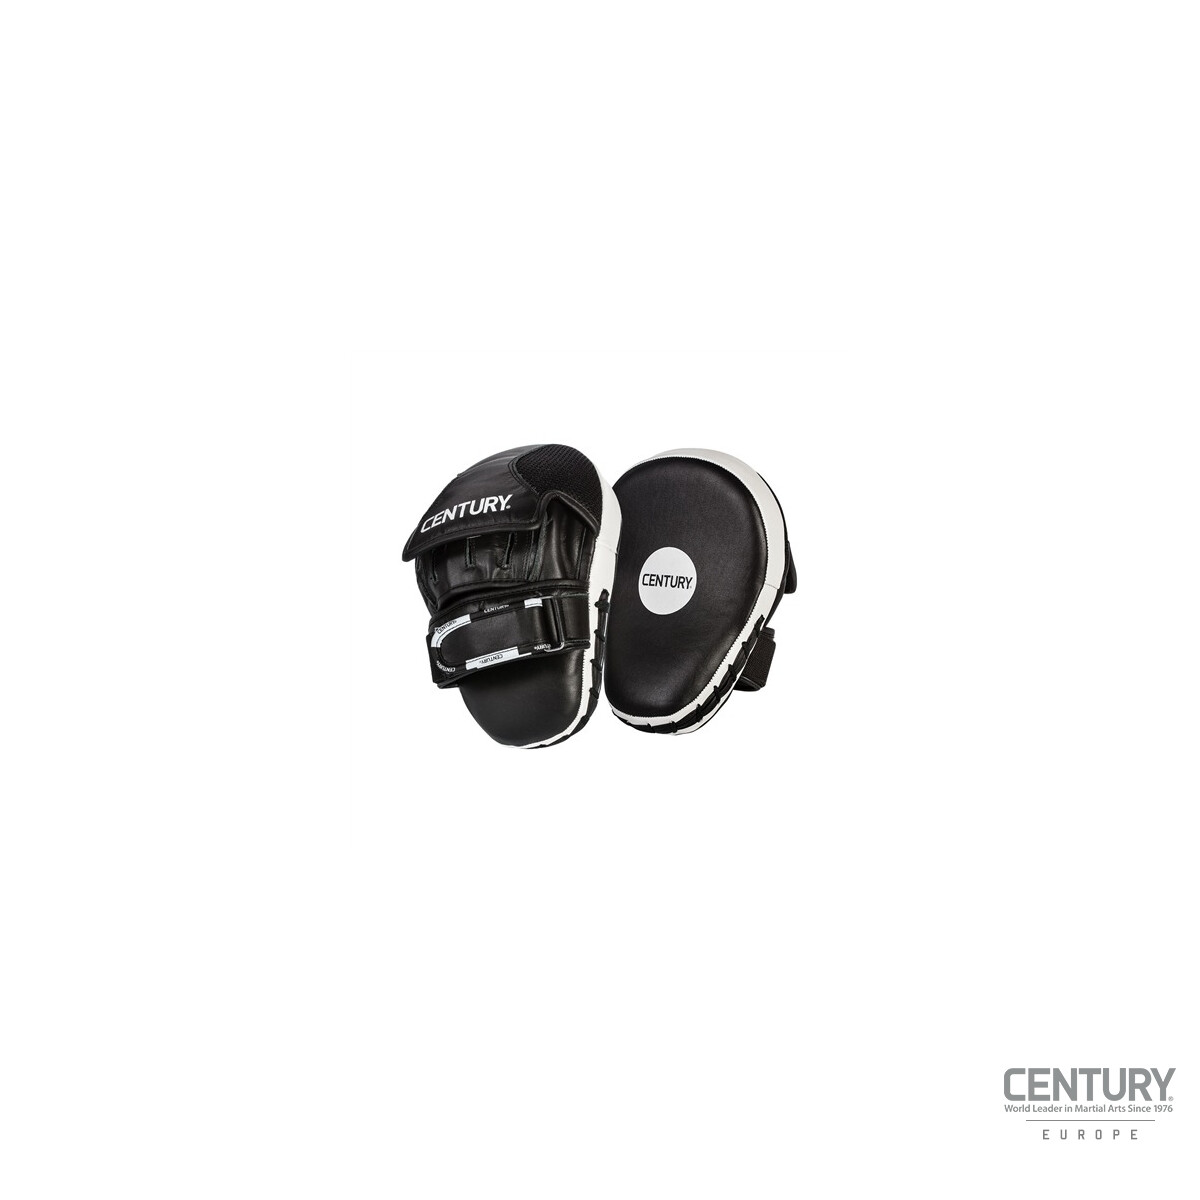 Century Creed Short Punch Mitts - Pair